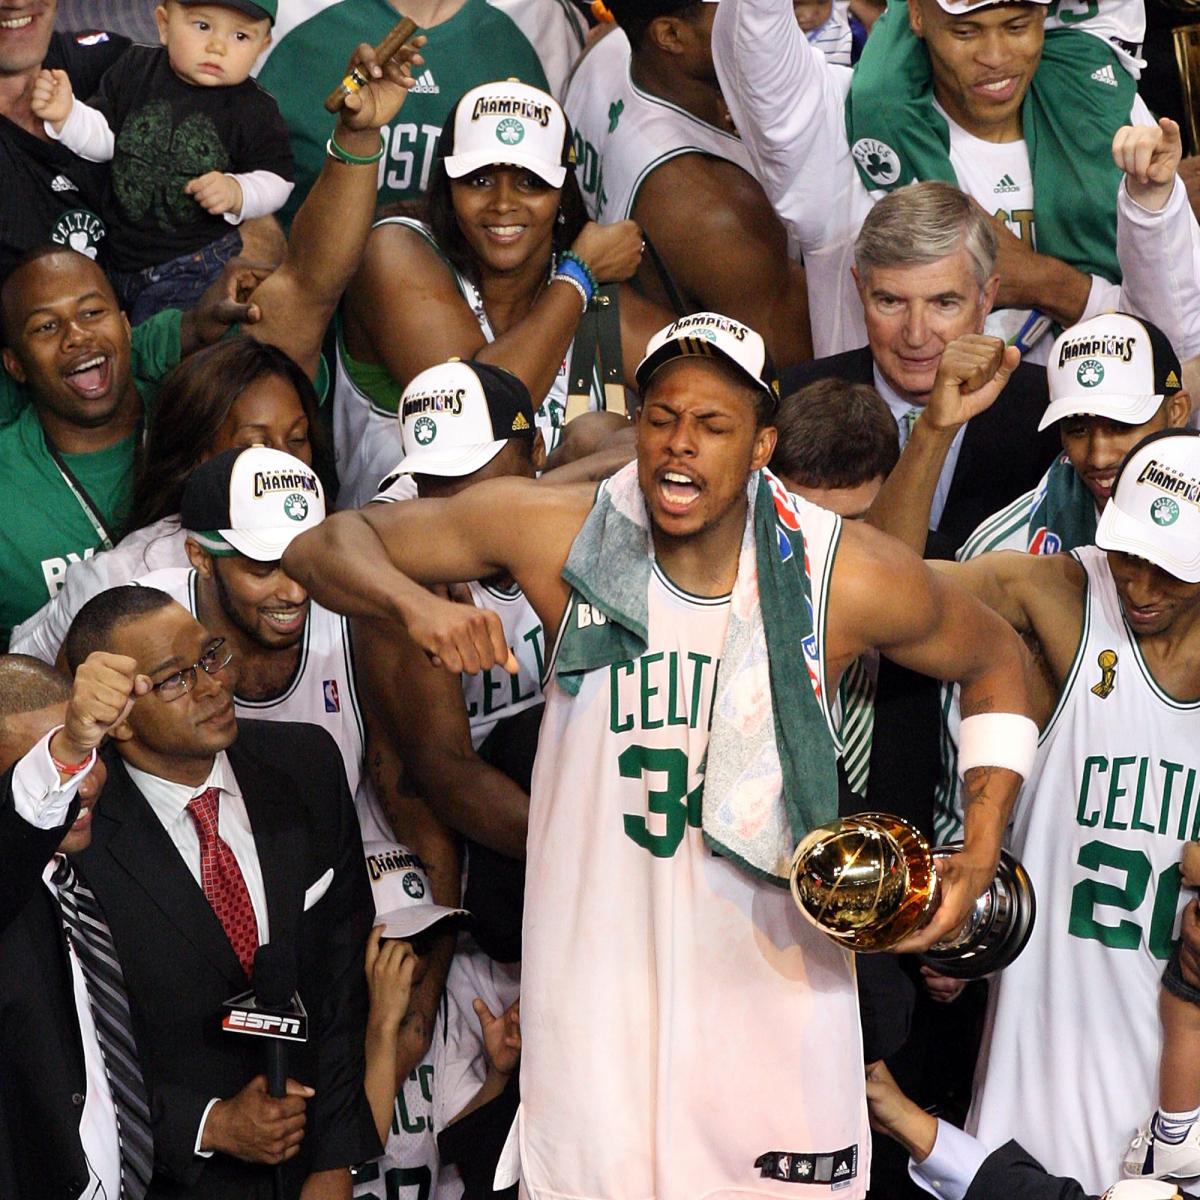 A look at what's in store for members of the 2009-10 Celtics